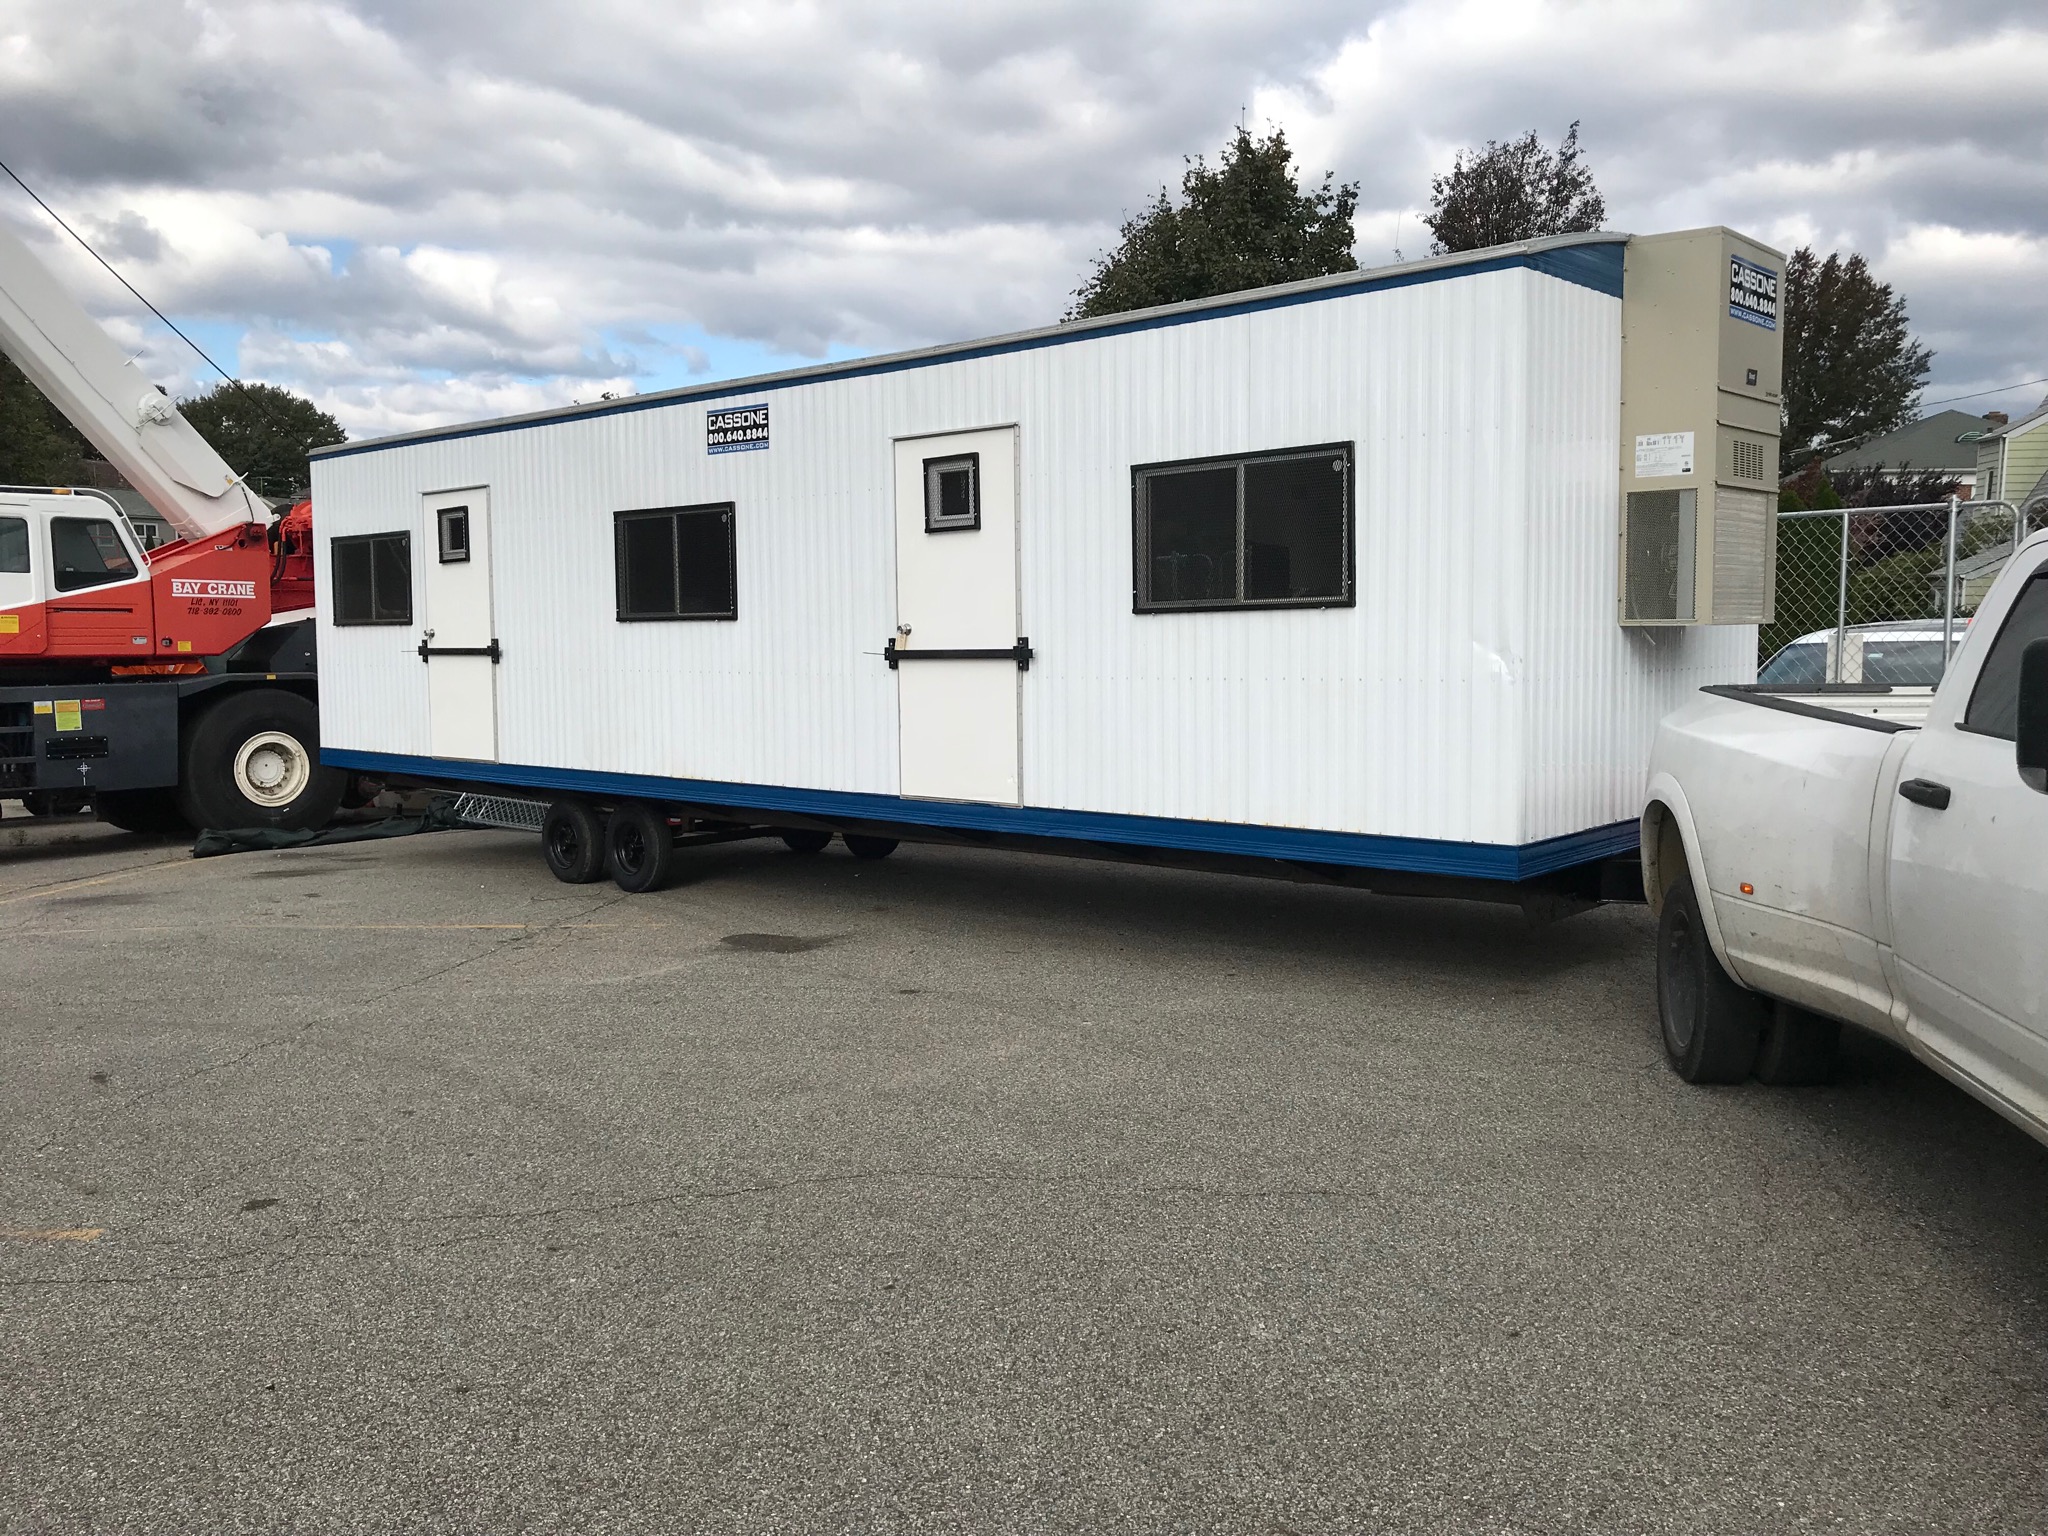 Should You Lease a Used Office Trailer?